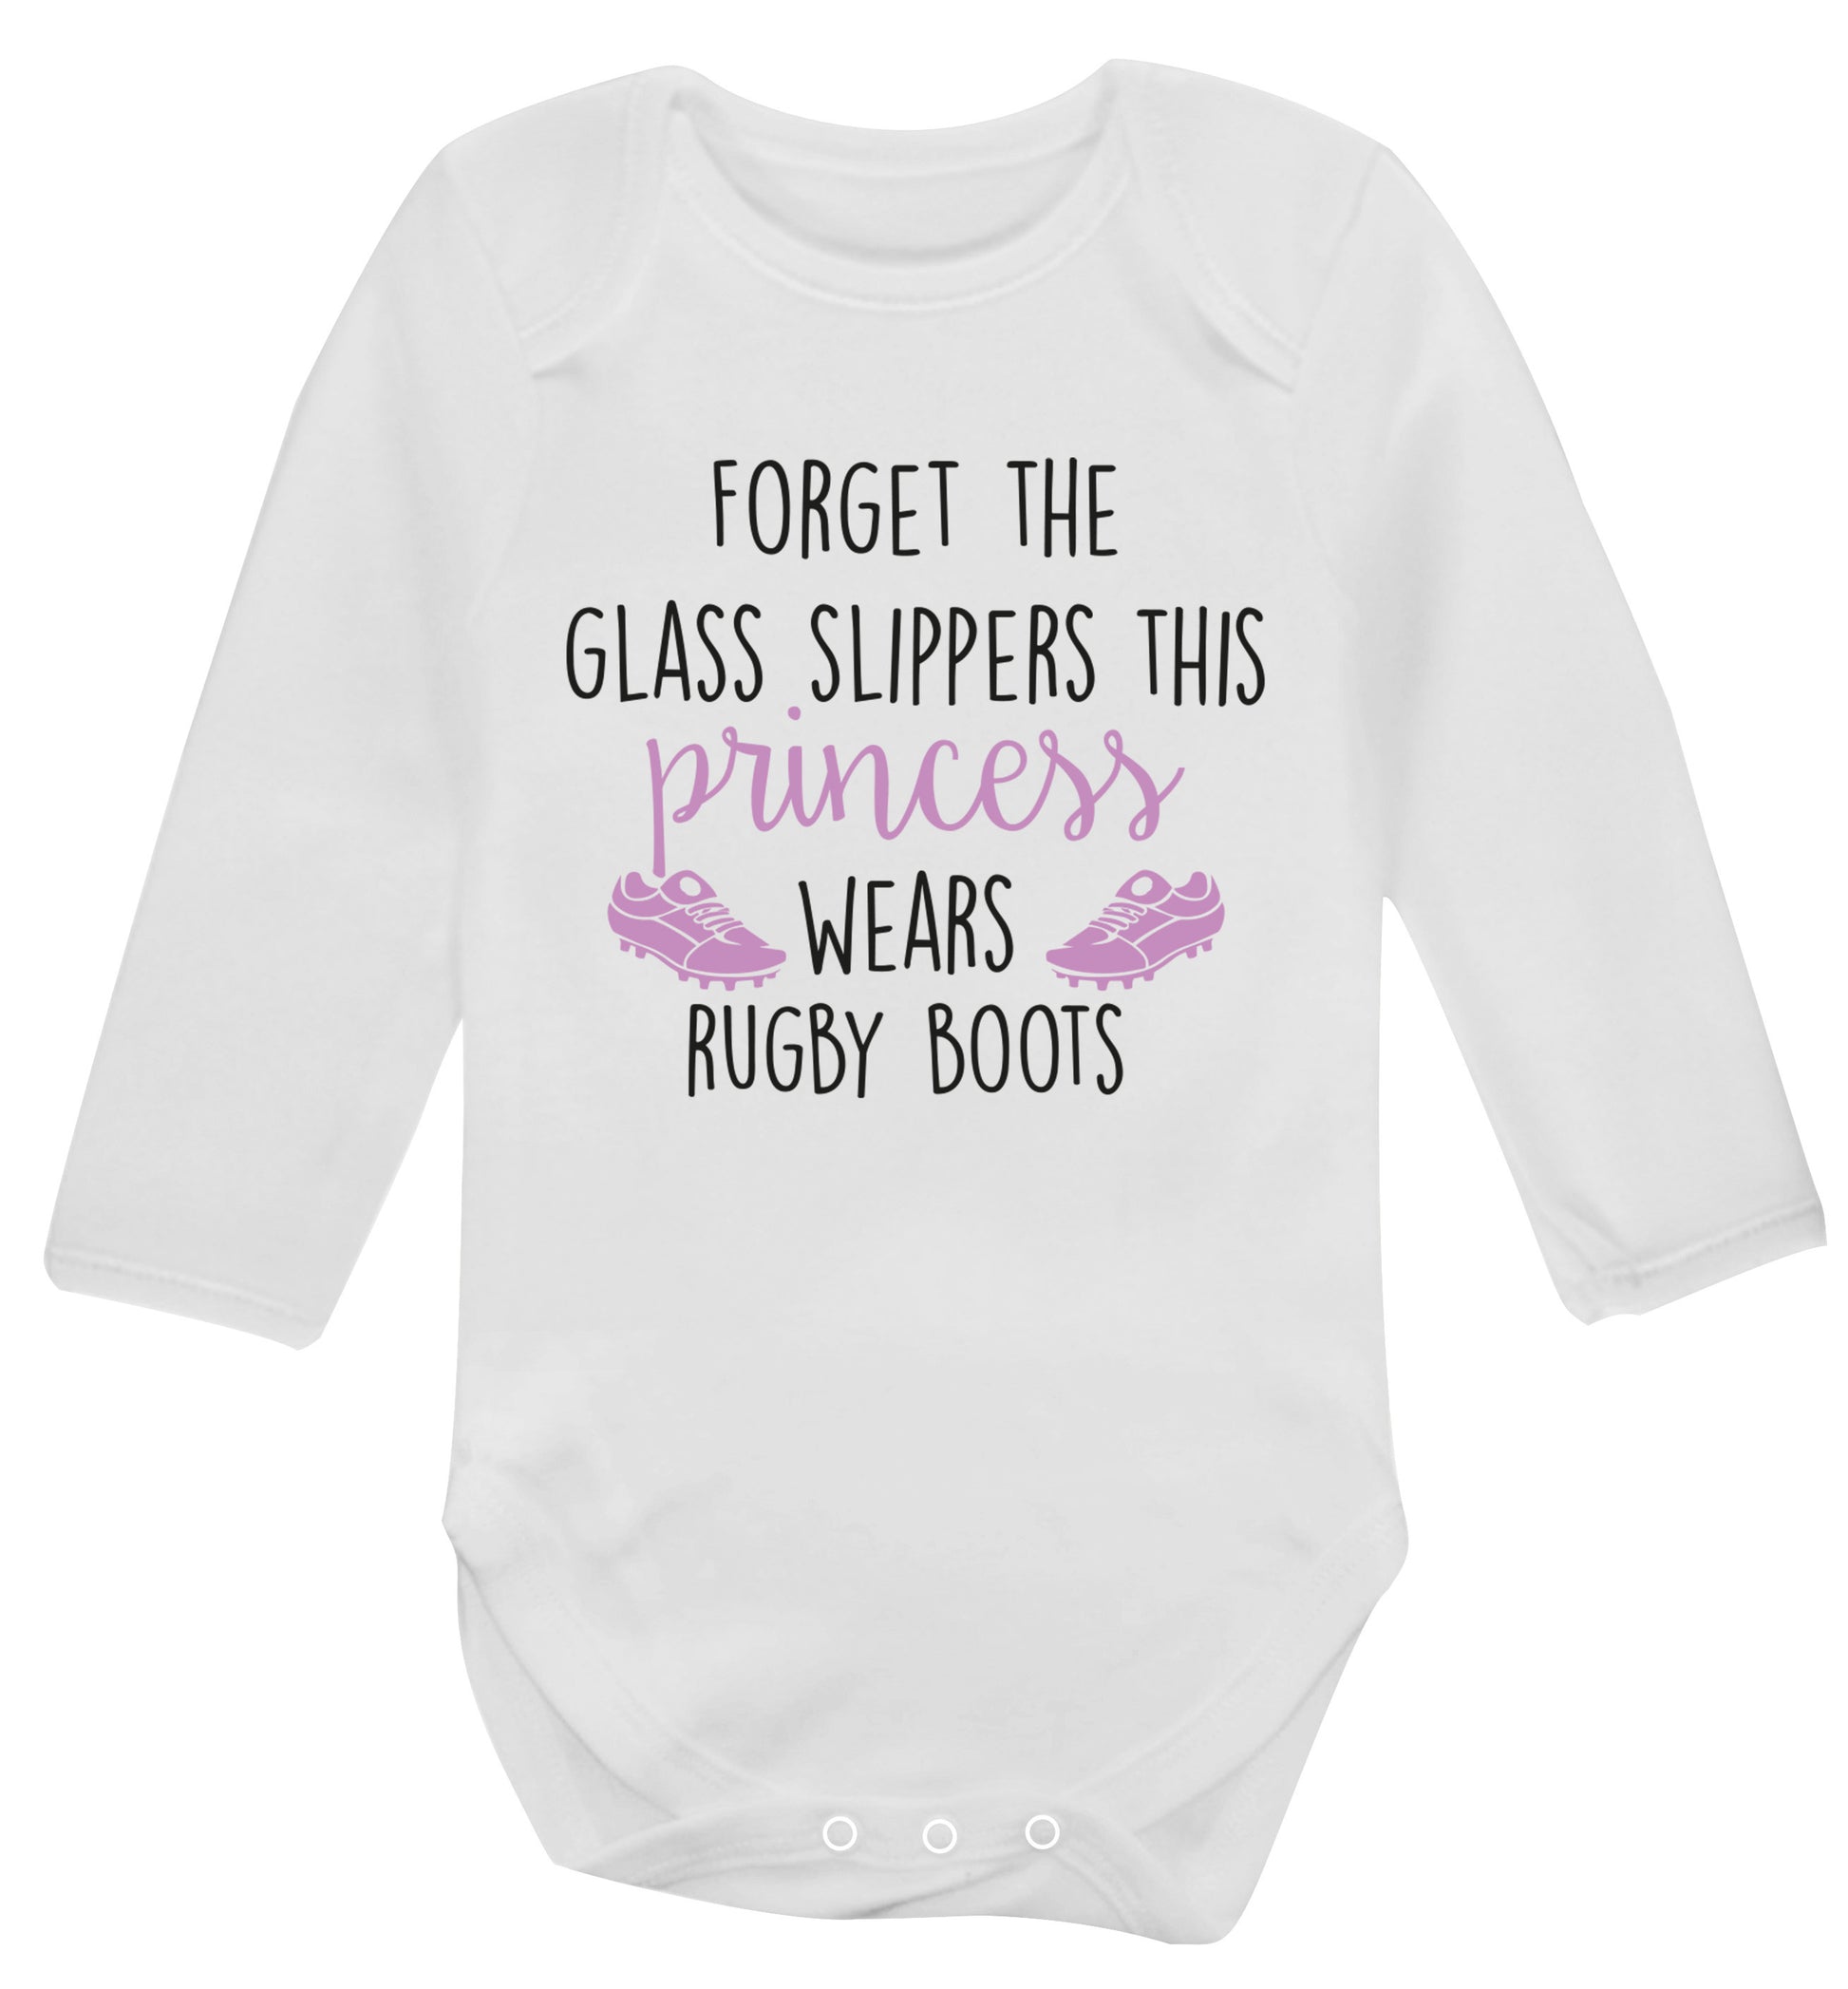 Forget the glass slippers this princess wears rugby boots Baby Vest long sleeved white 6-12 months